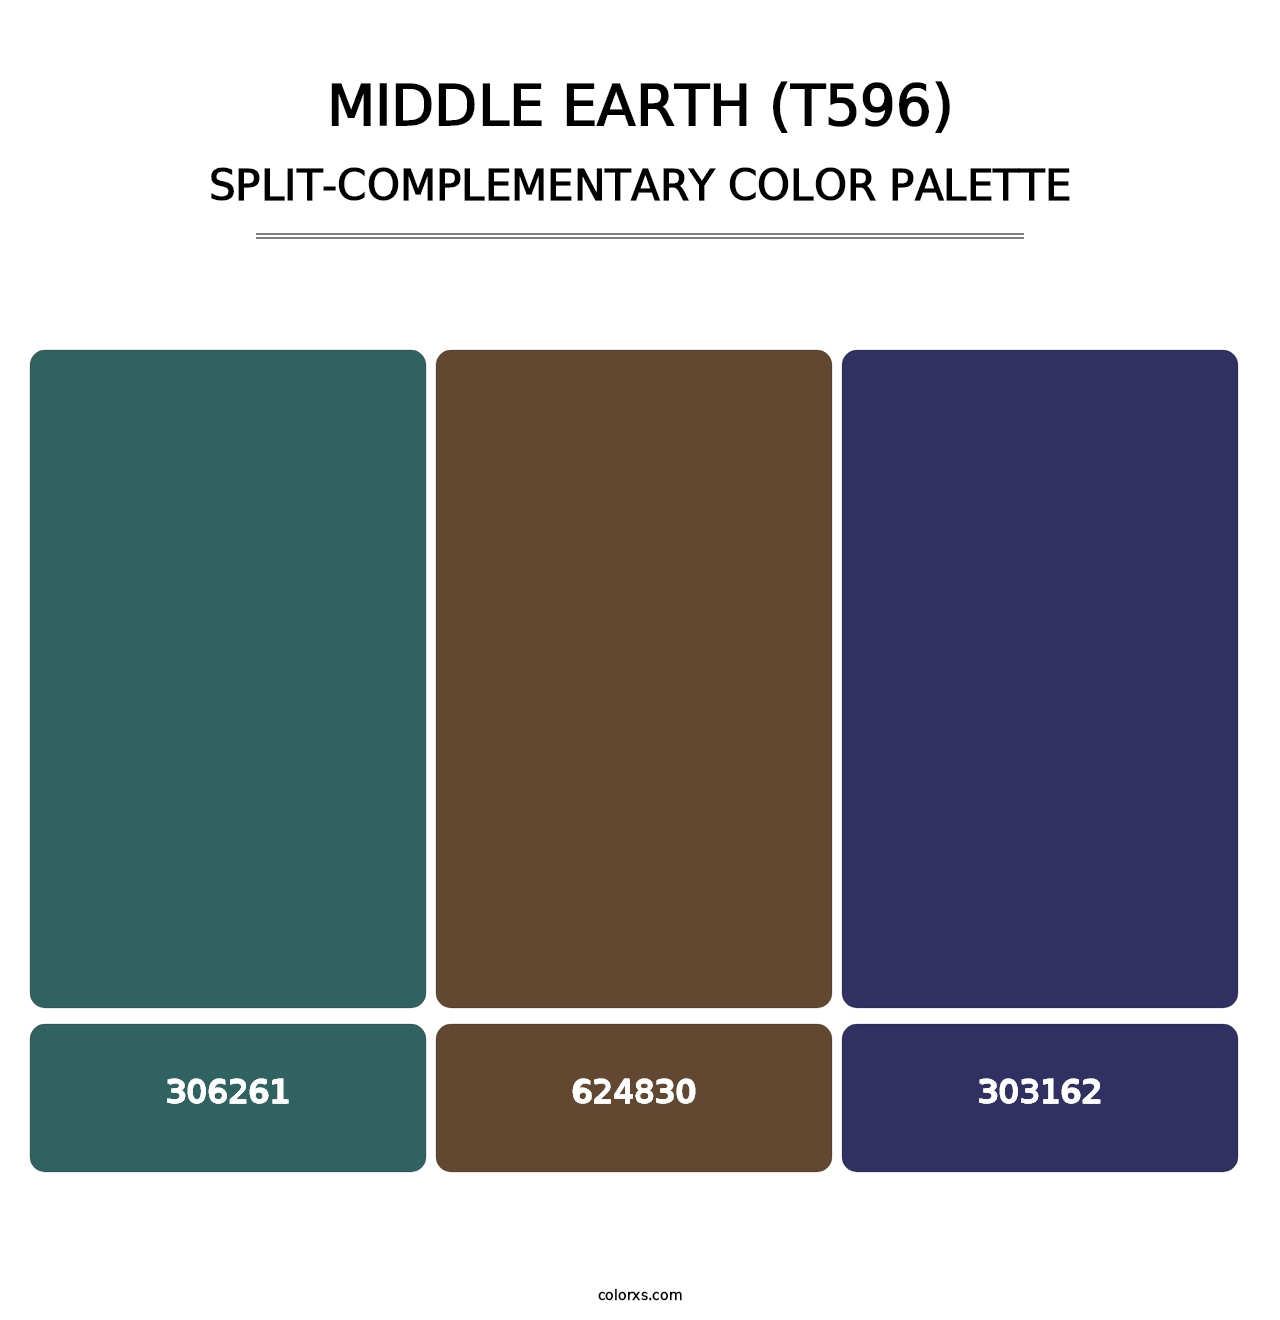 Middle Earth (T596) - Split-Complementary Color Palette